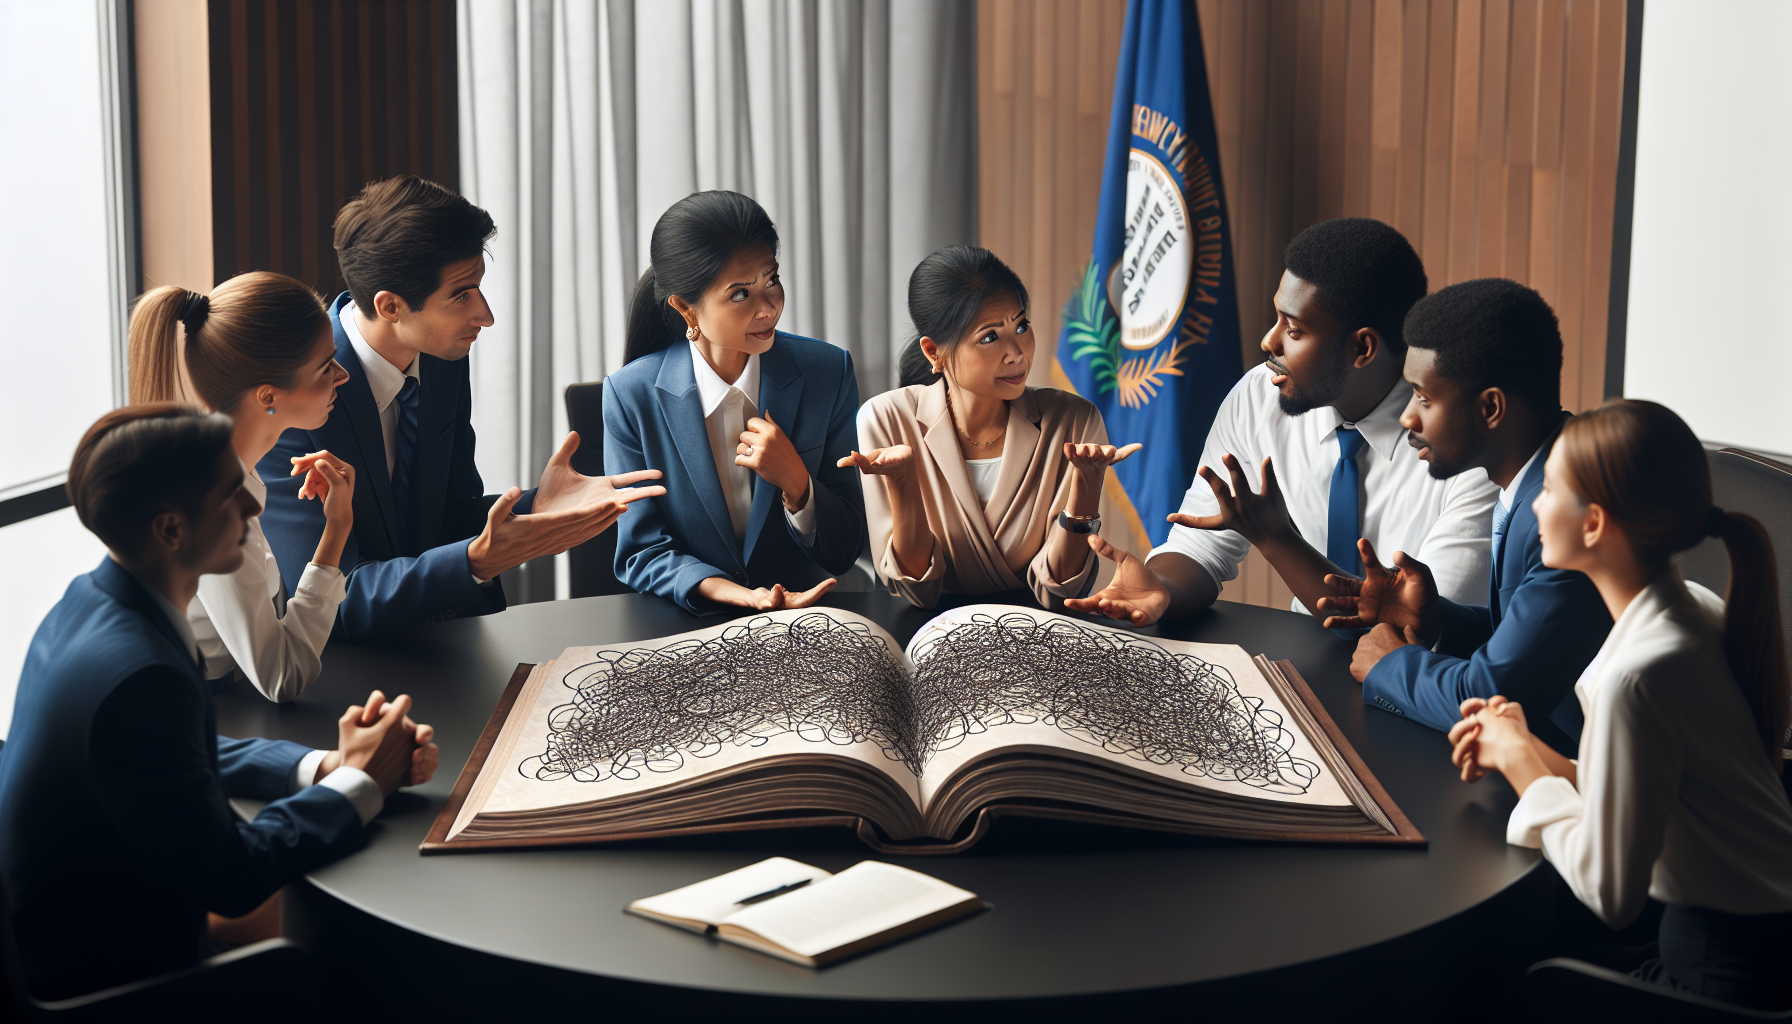 An illustration of a group of employees discussing a handbook, representing the importance of employee handbooks in Kentucky.